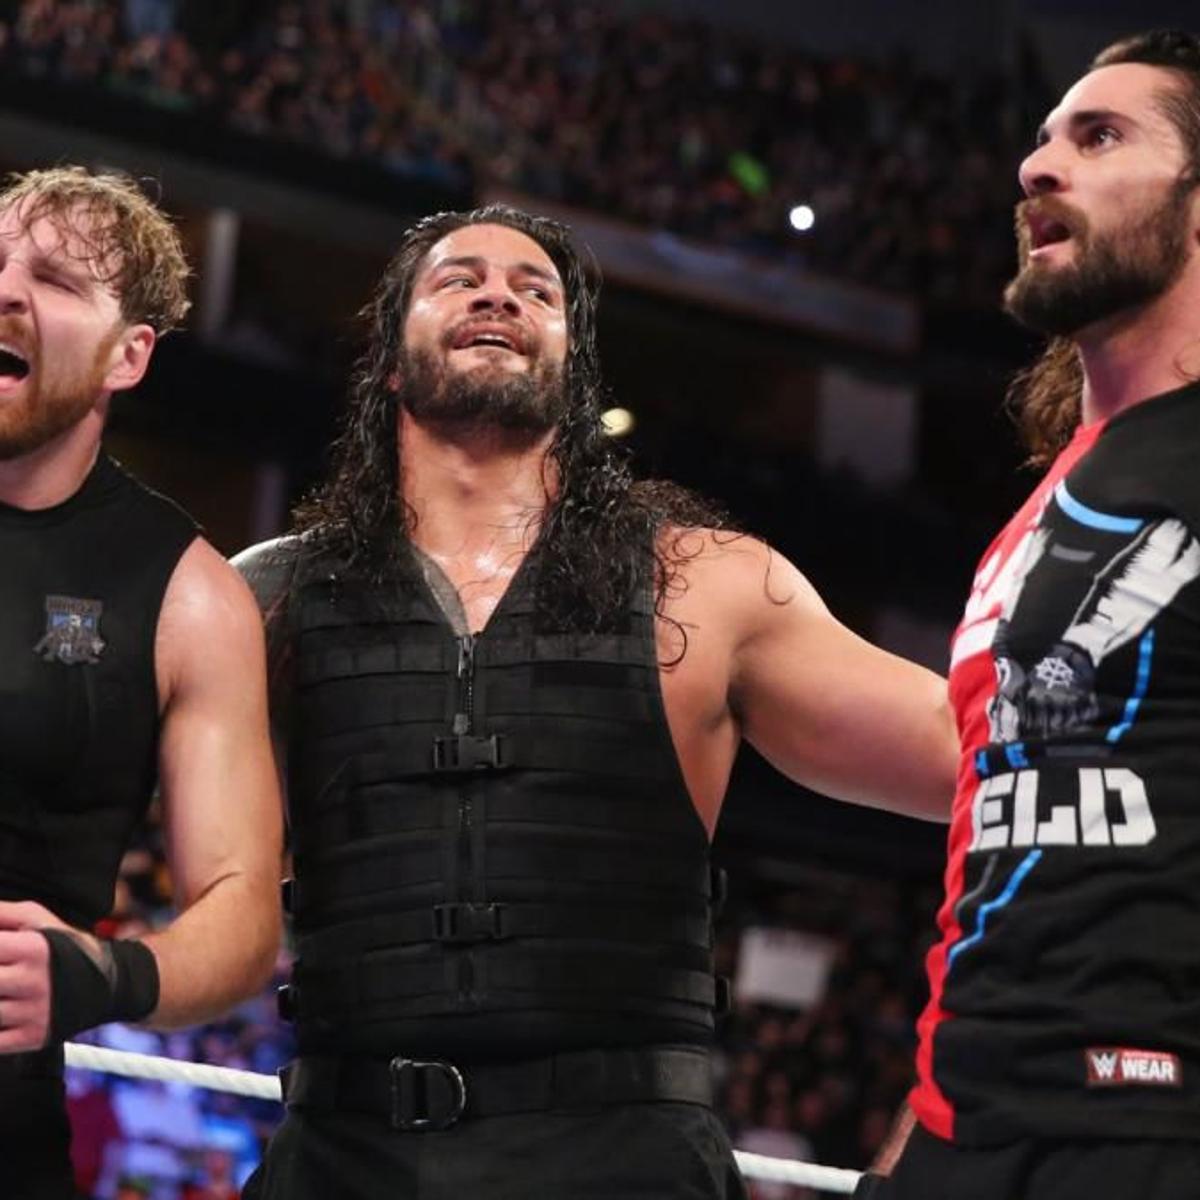 Wwe How The Return Of Dean Ambrose Could Save Roman Reigns